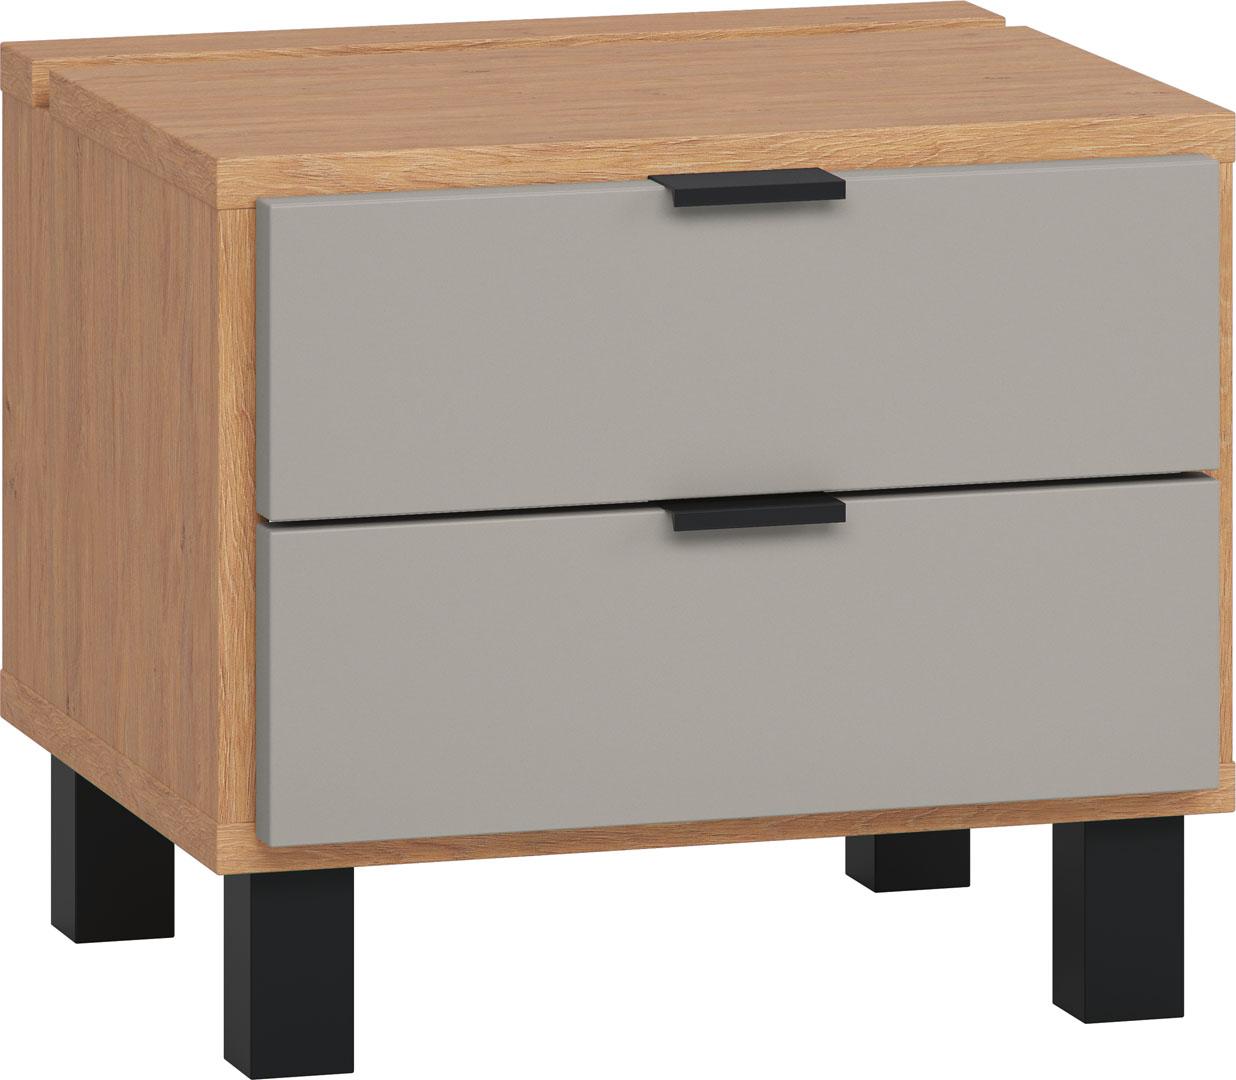 Bedside table with drawers and functional slat Simple